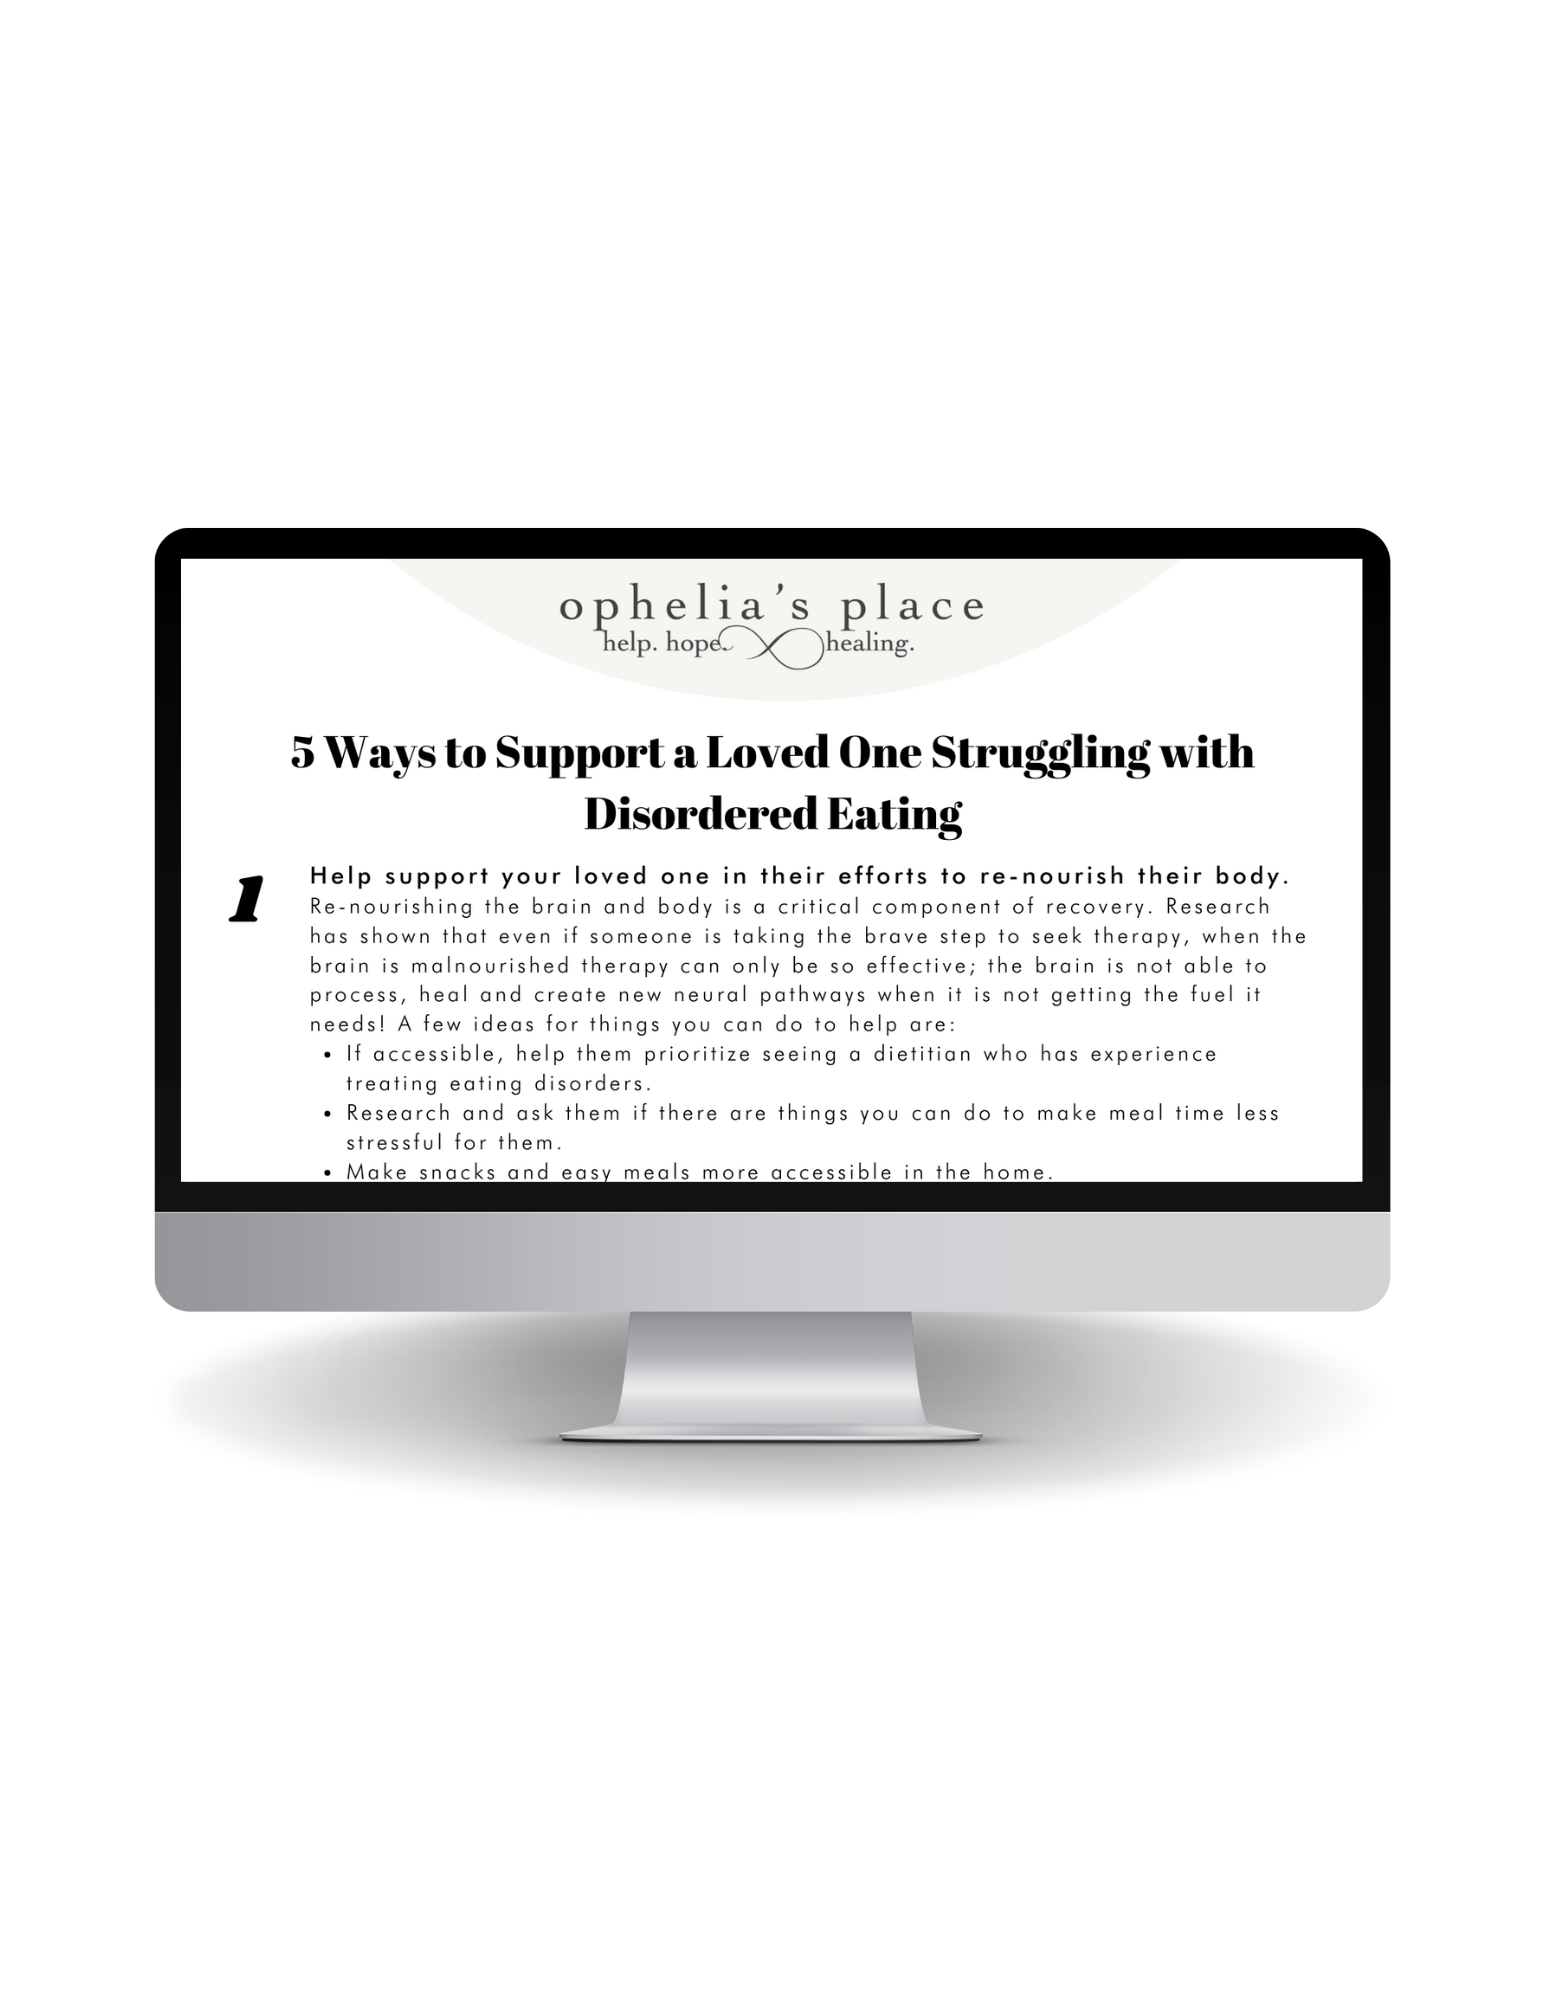 5 Ways to Support a Loved One Guide